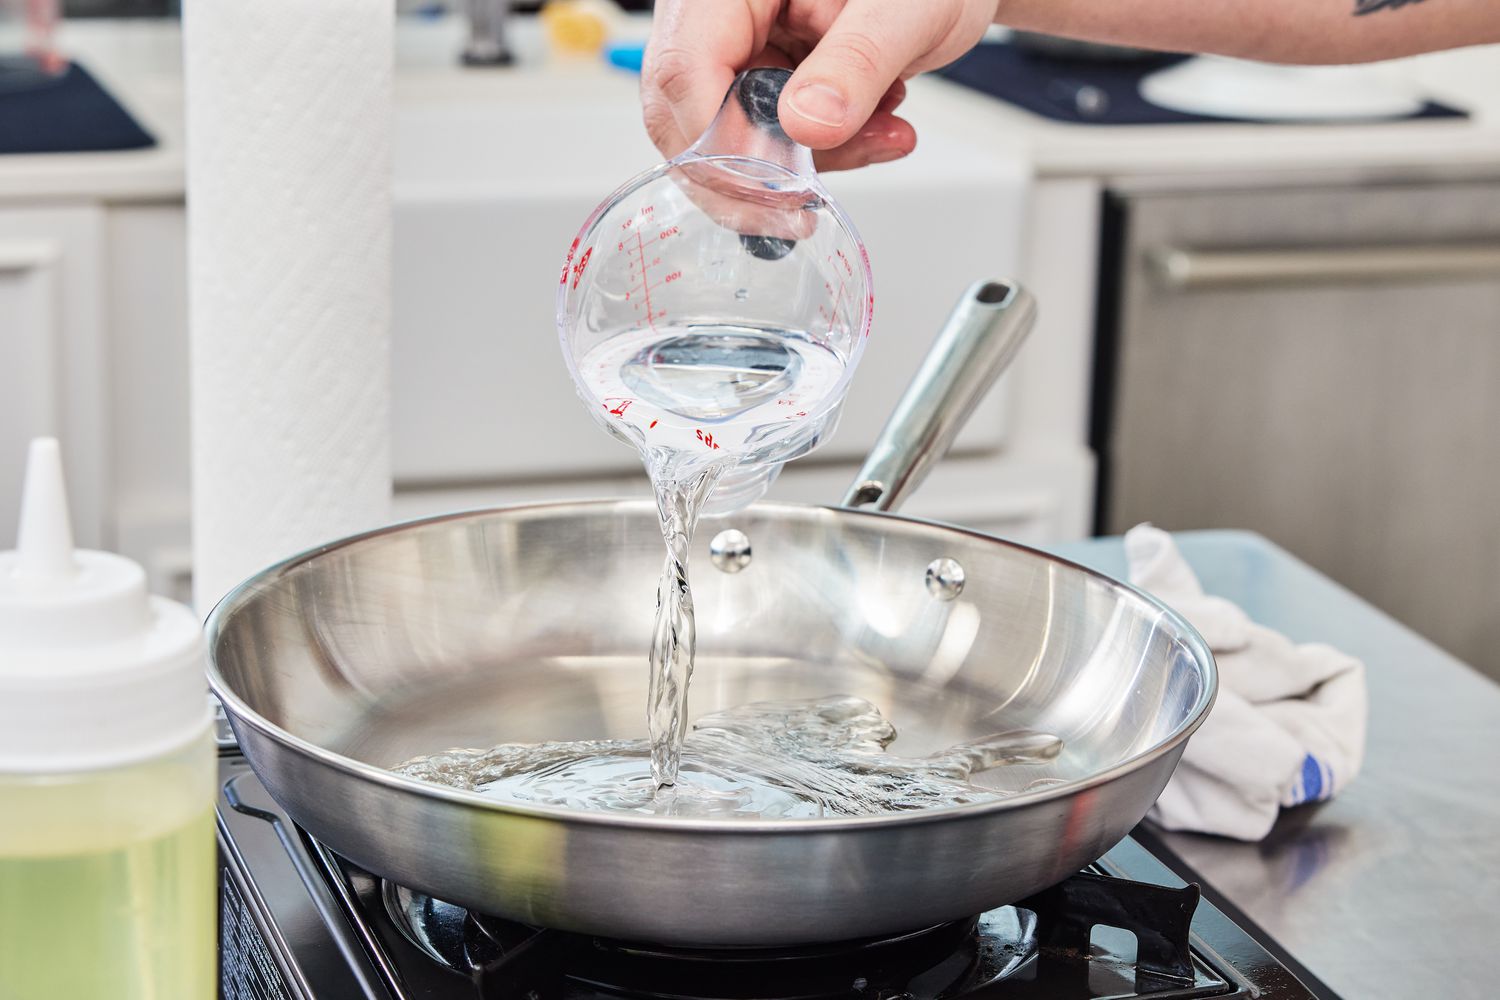 Pouring water in the Misen skillet during testing